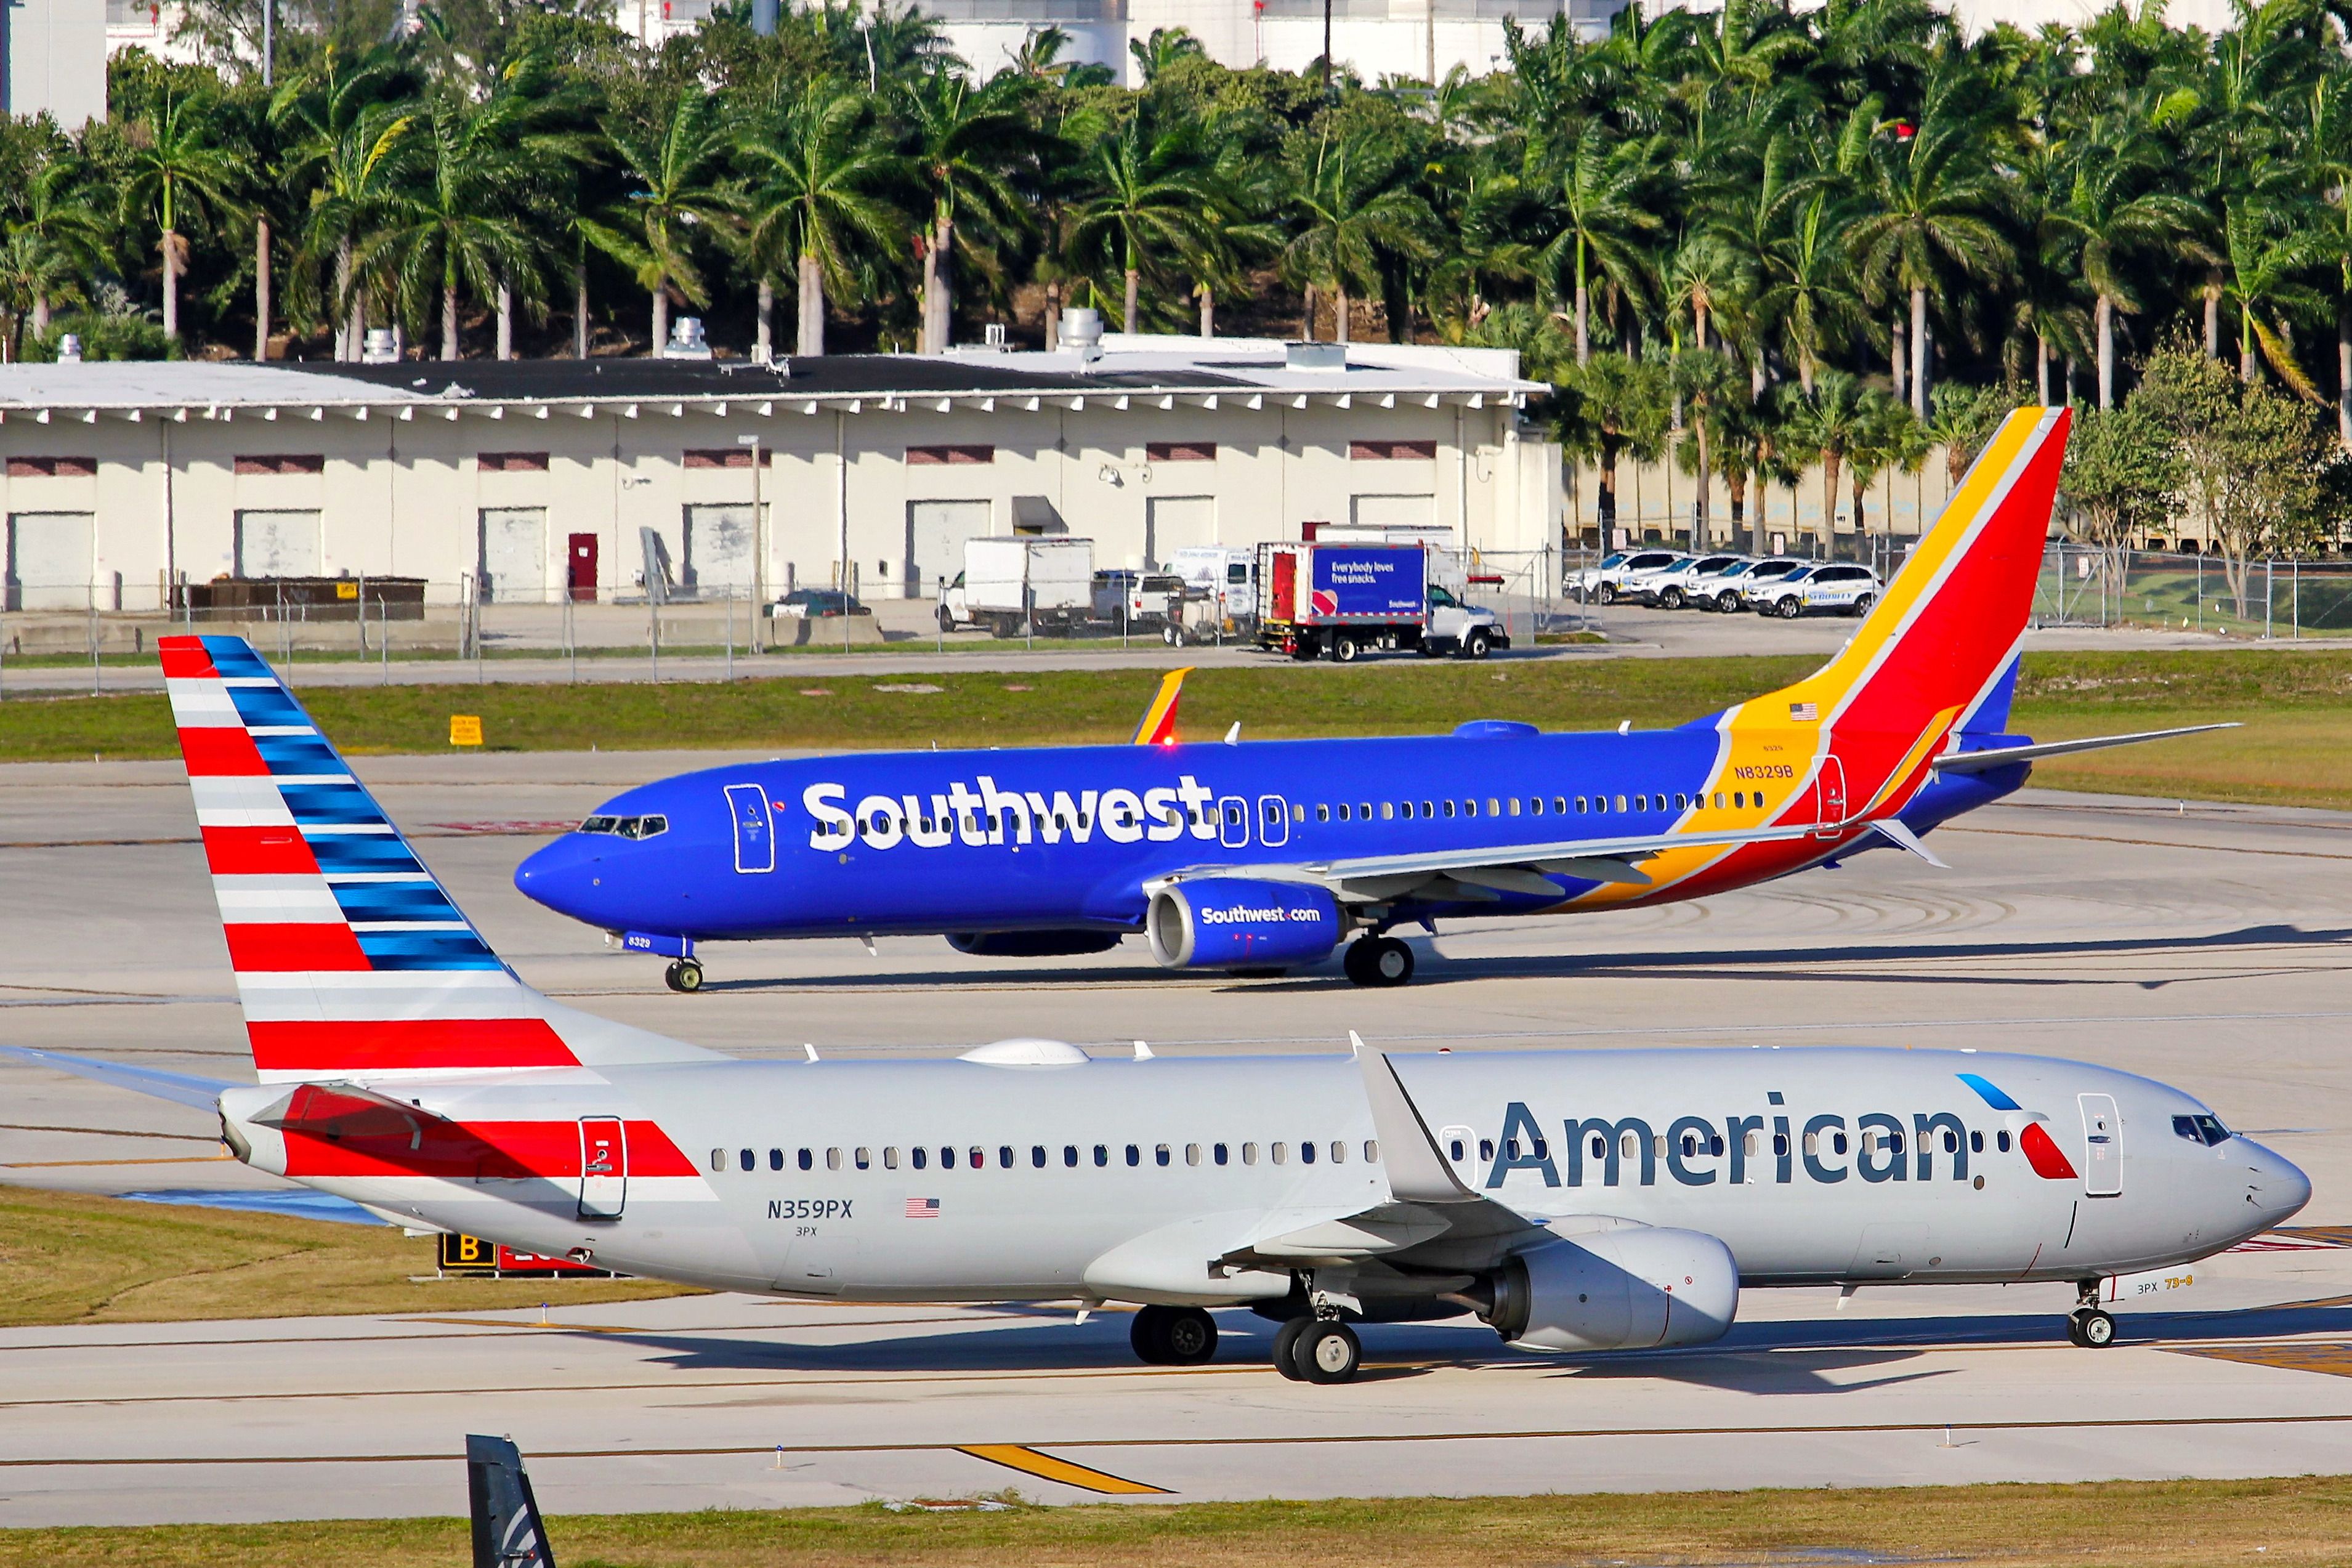 A Southwest Airlines 737 and an American Airlines 737 on the apron in Fort Lauderdale.